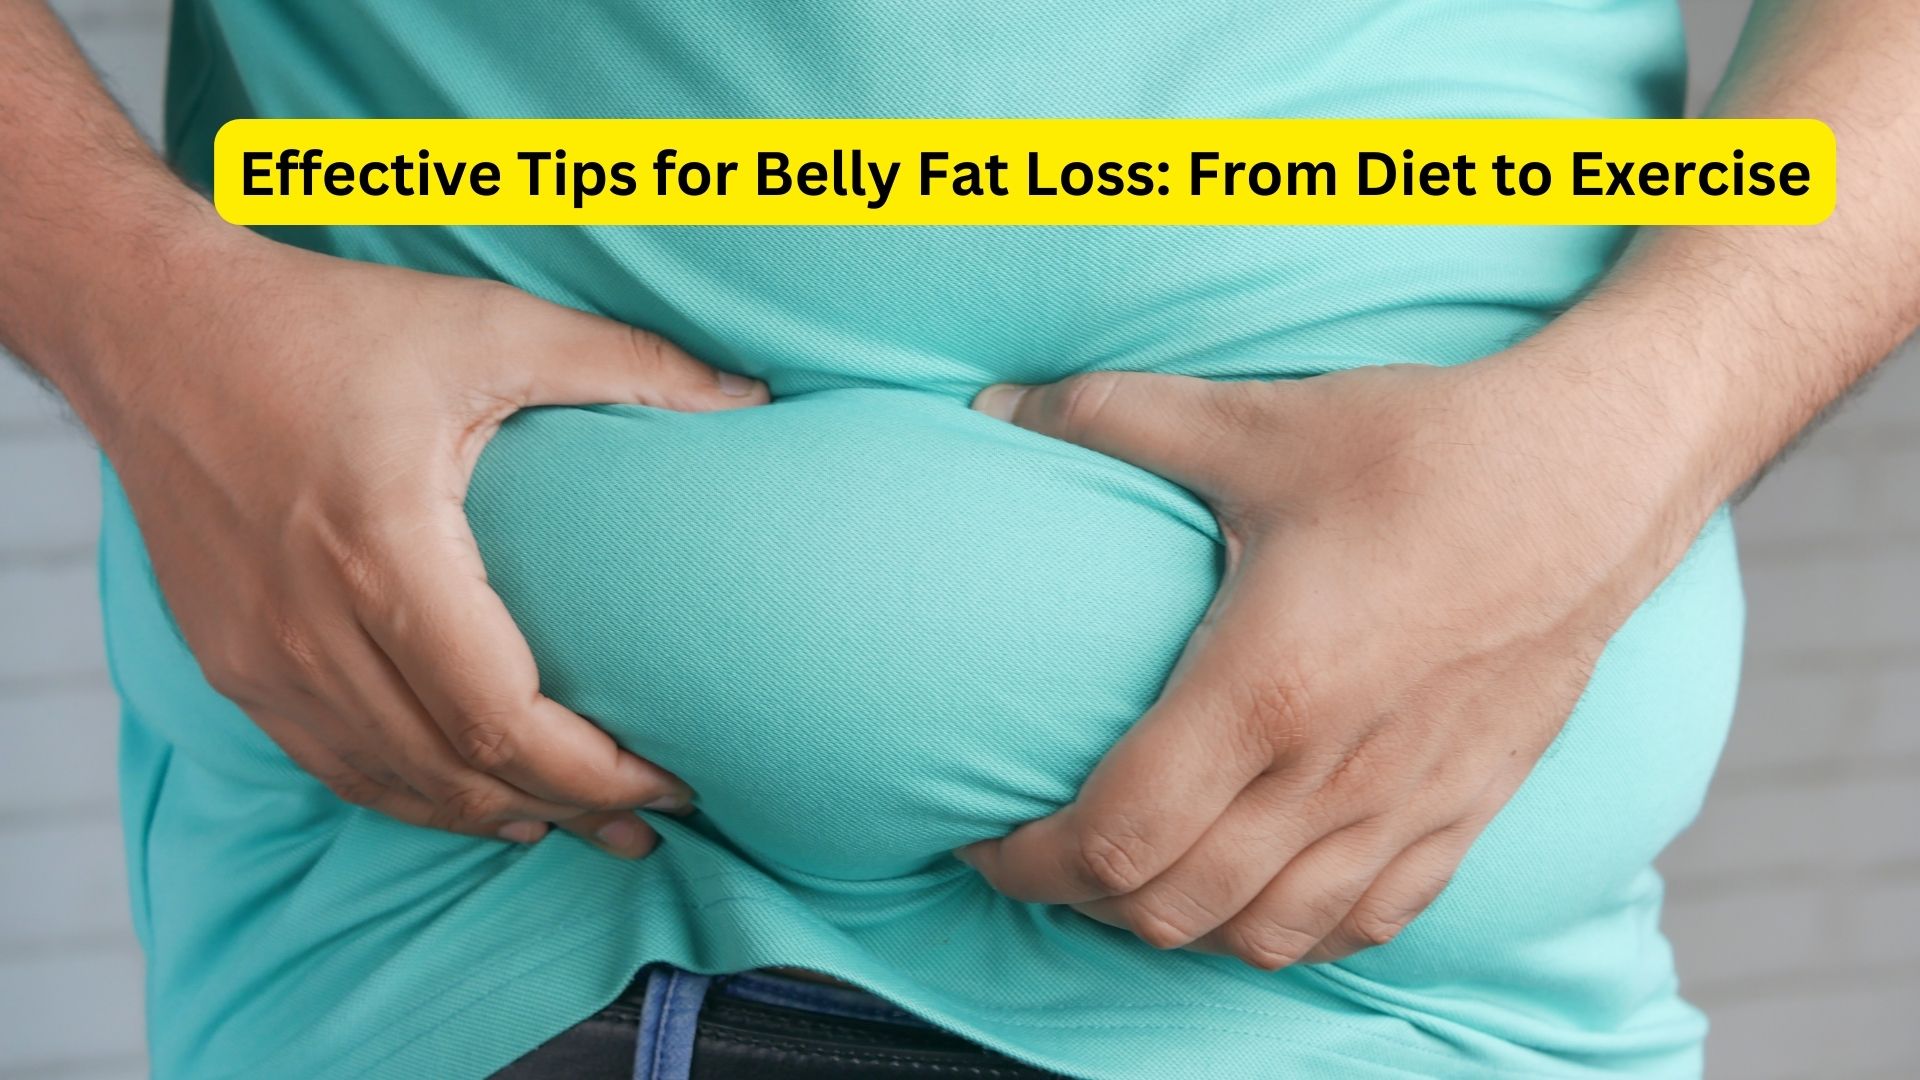 Effective Tips for Belly Fat Loss: From Diet to Exercise